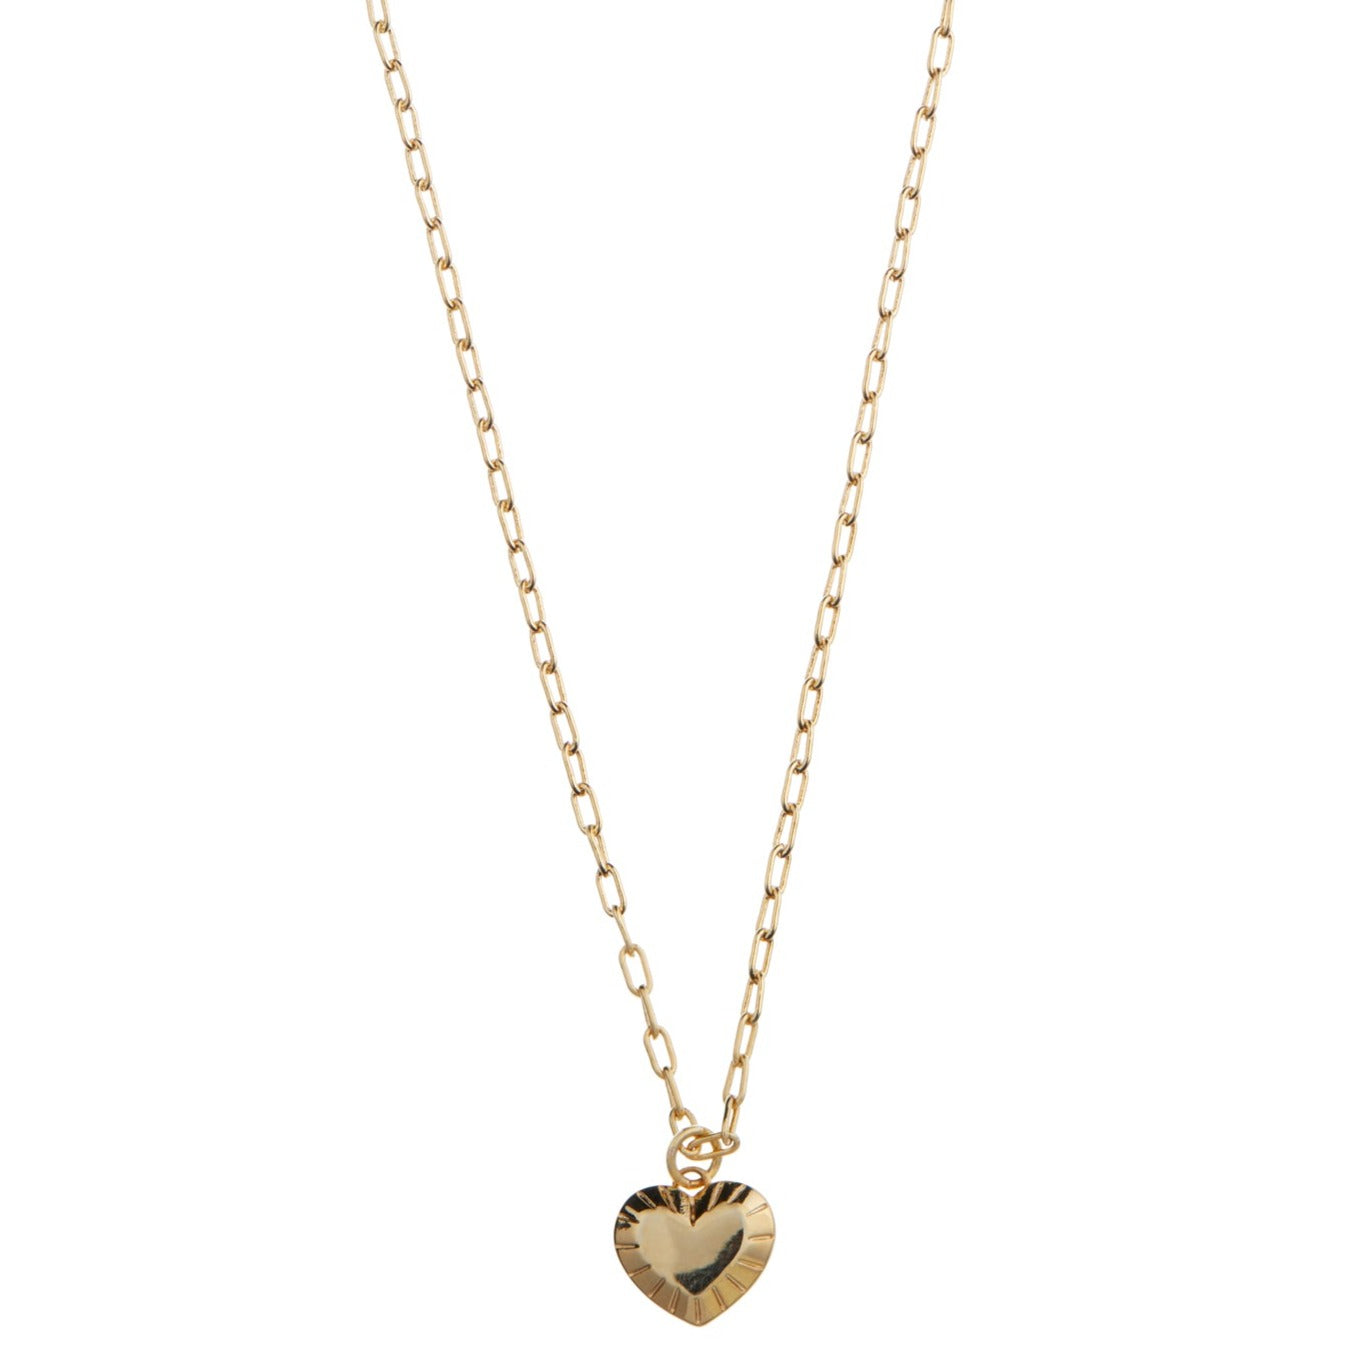 Etched Heart Necklace - Gold - Orelia London